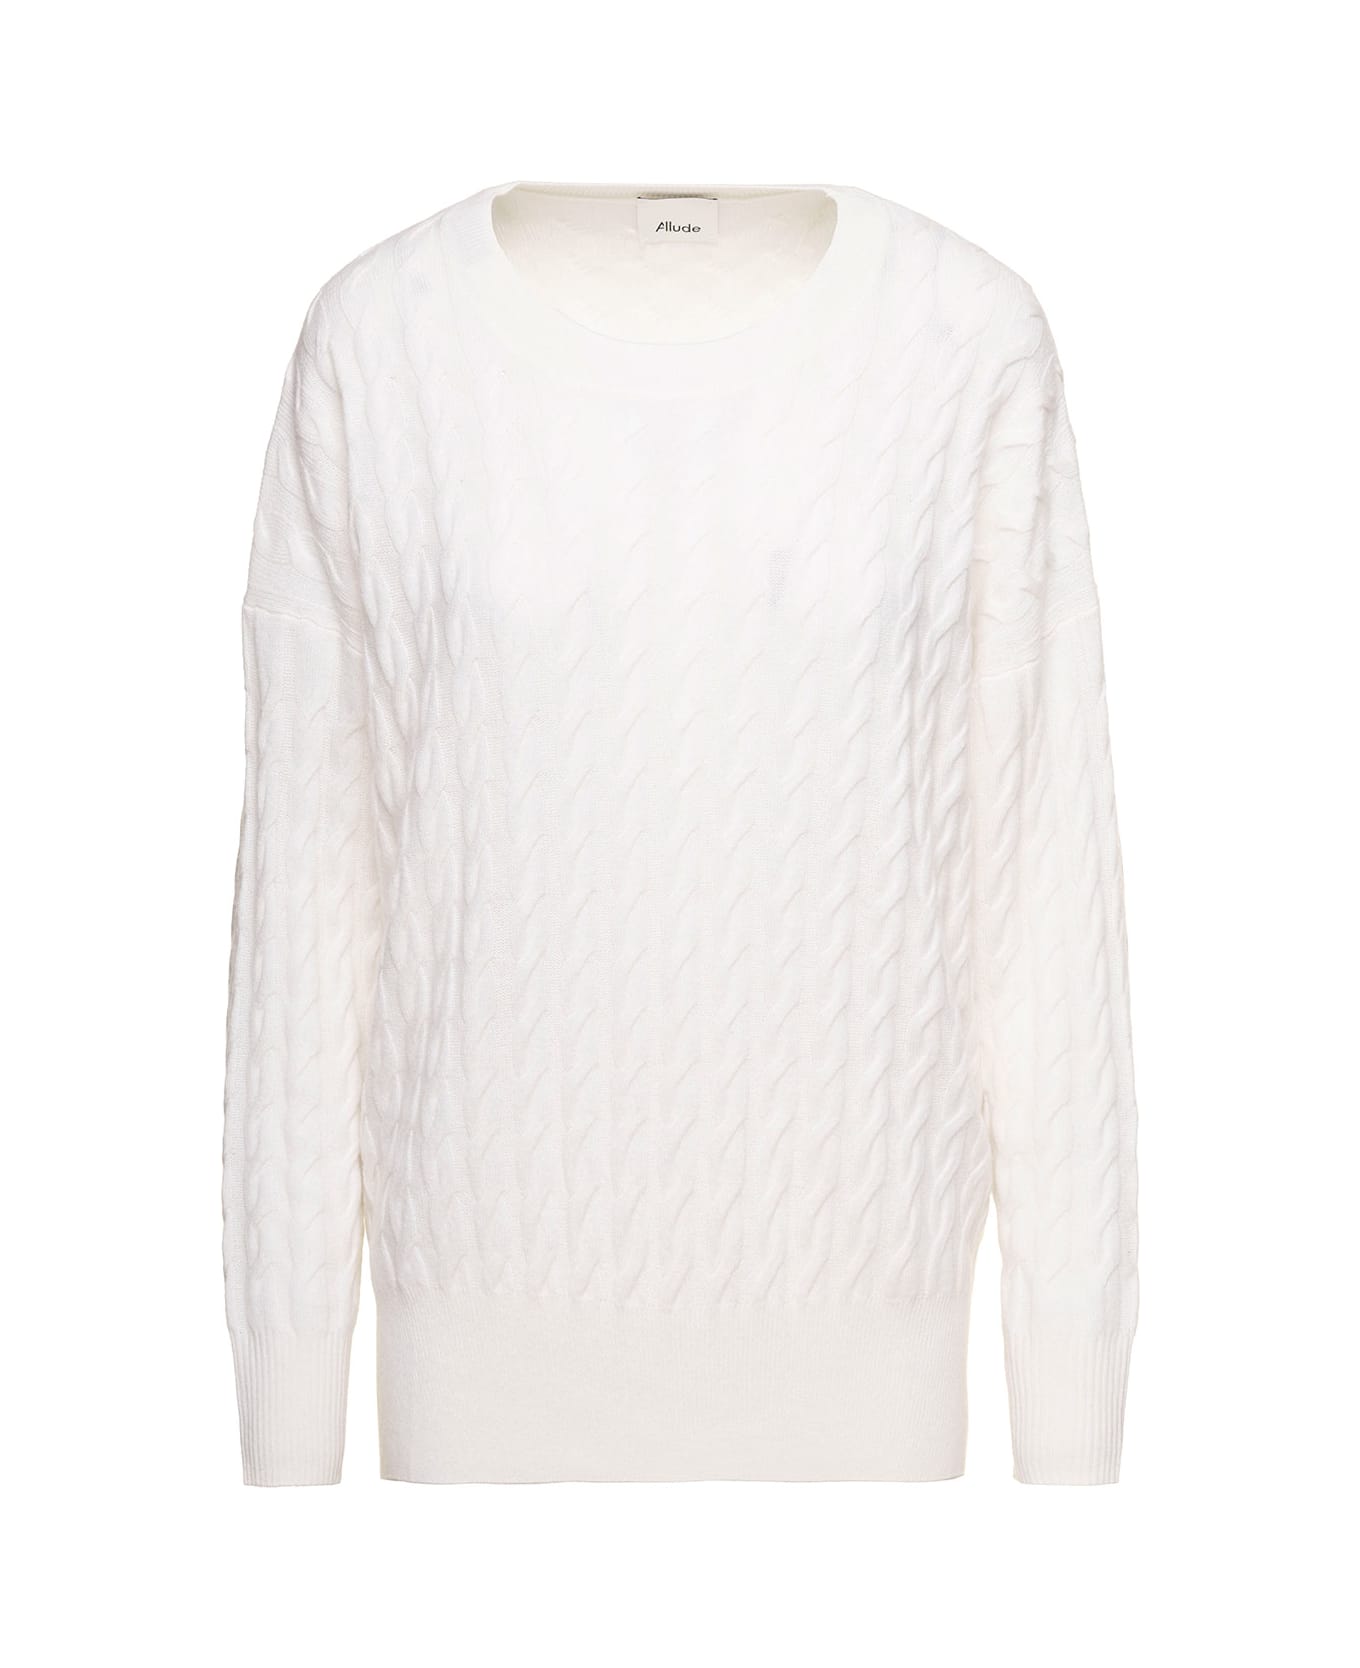 Allude White Cable-knit Sweater In Cashmere Woman - White